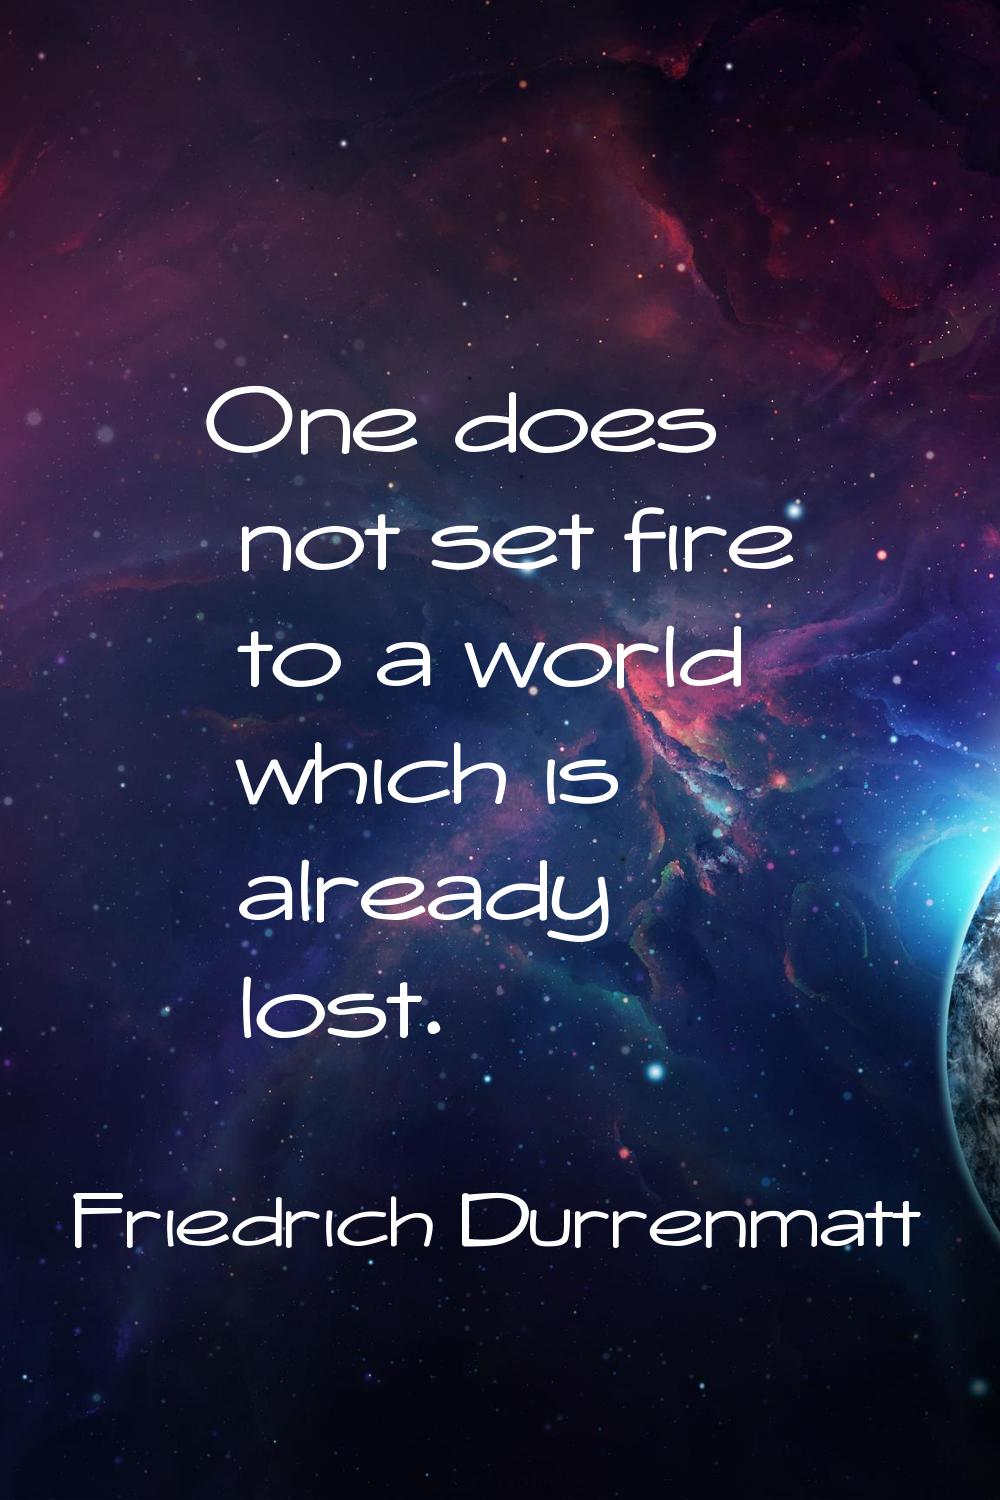 One does not set fire to a world which is already lost.